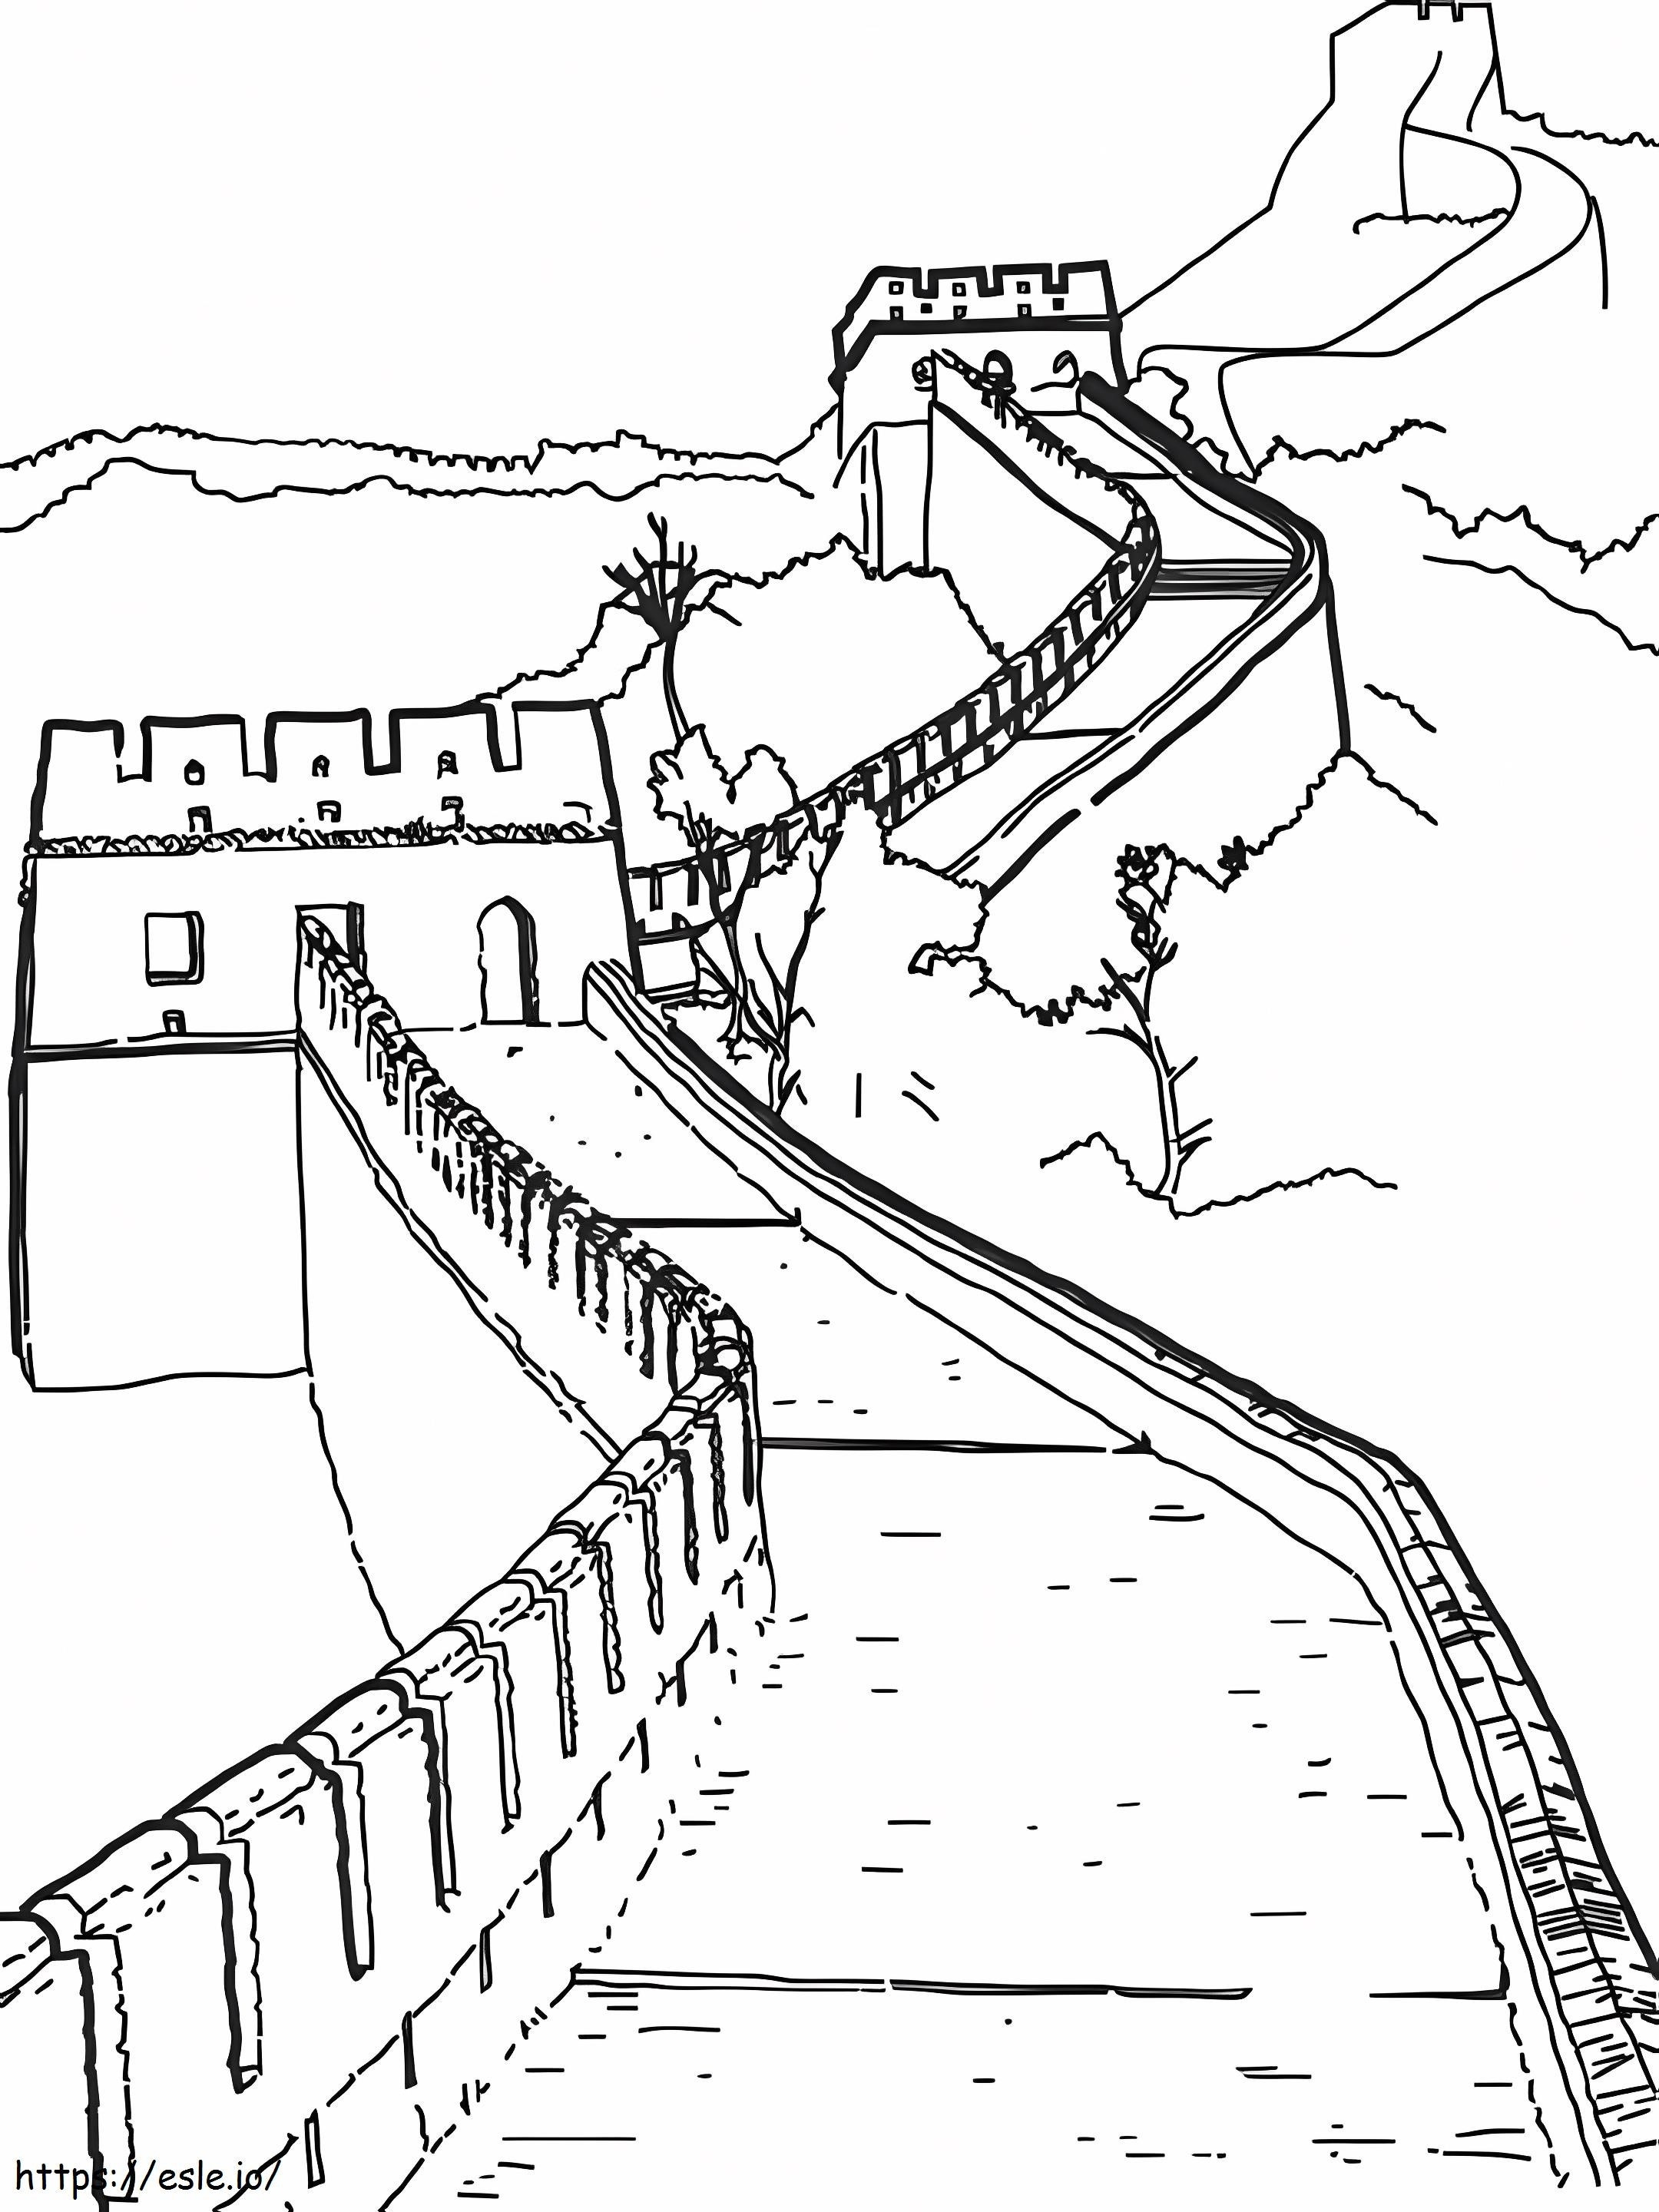 Basic Great Wall coloring page